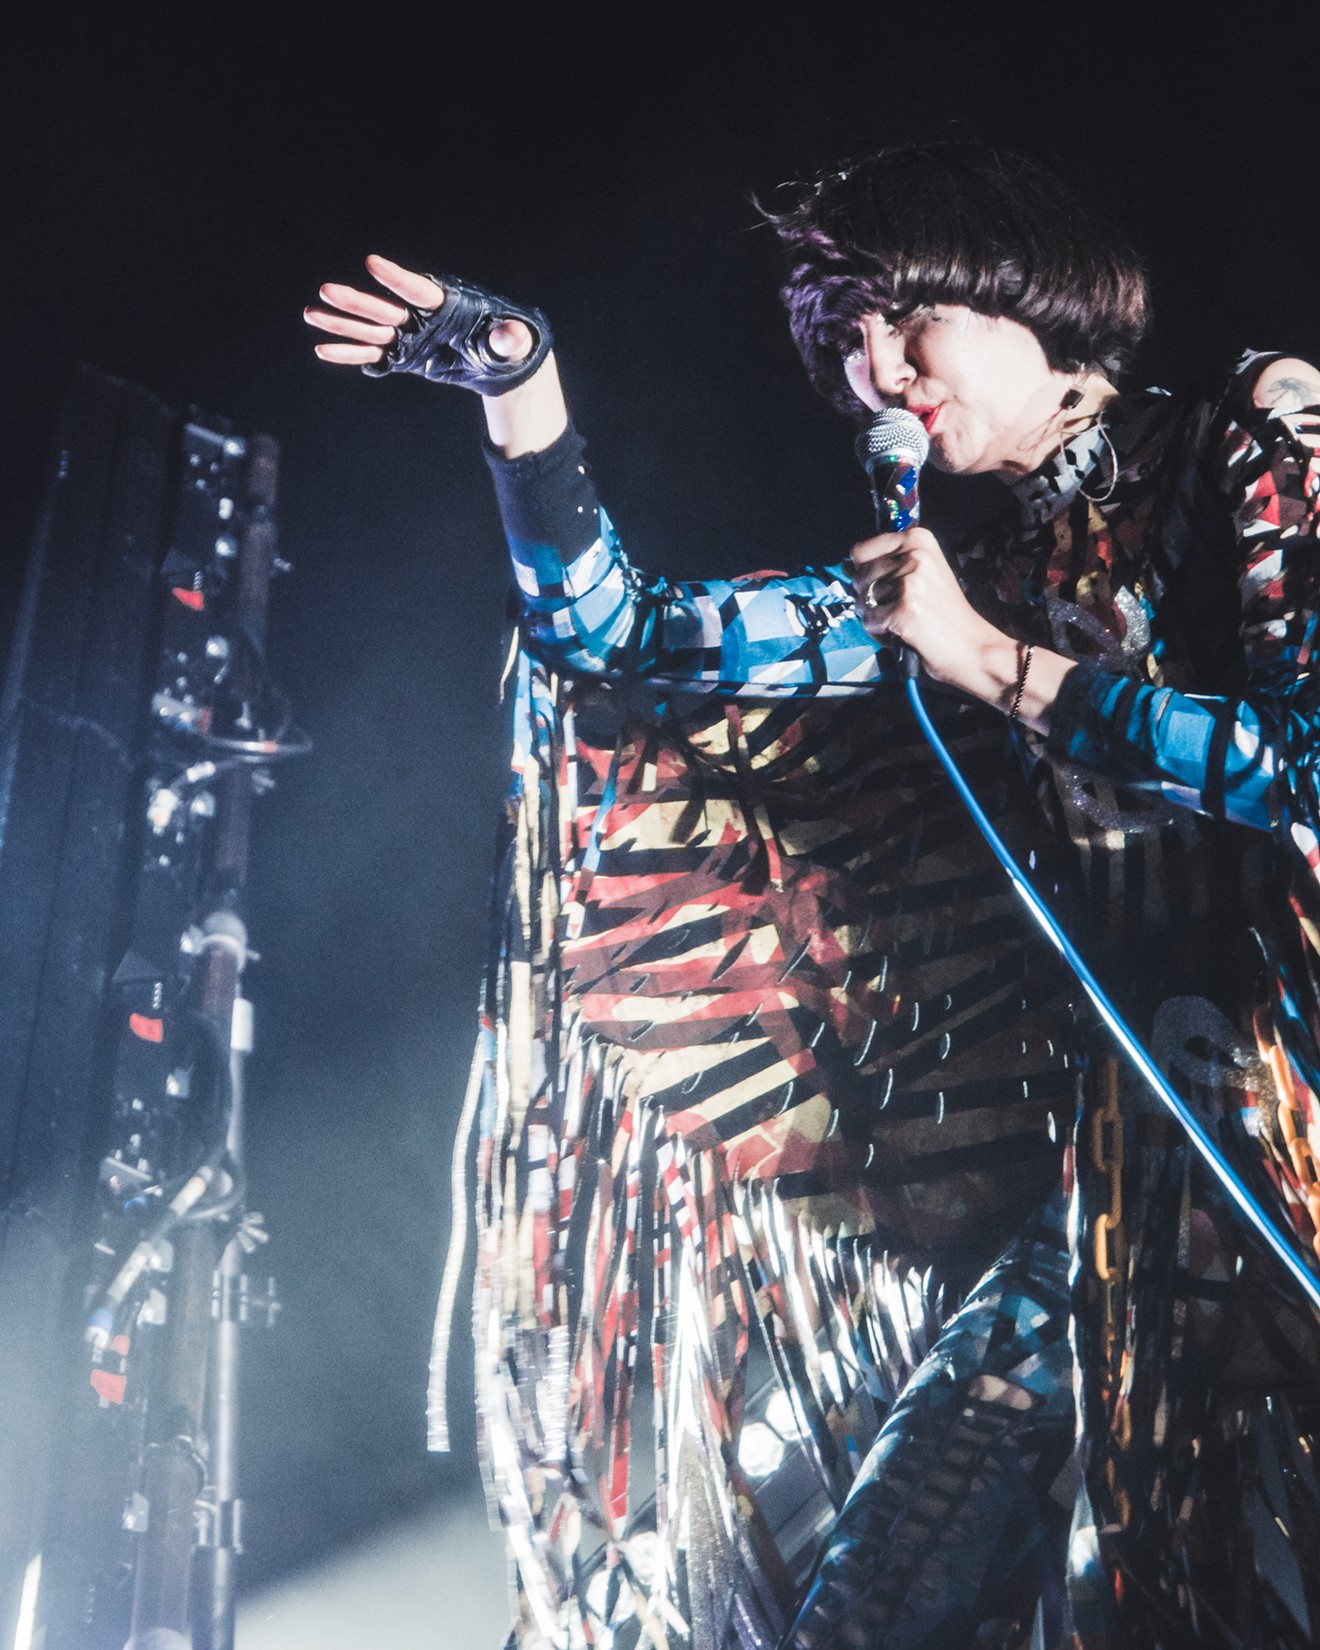 Karen O and her band the Yeah Yeah Yeahs took us to a climax on Tuesday night in Irving.